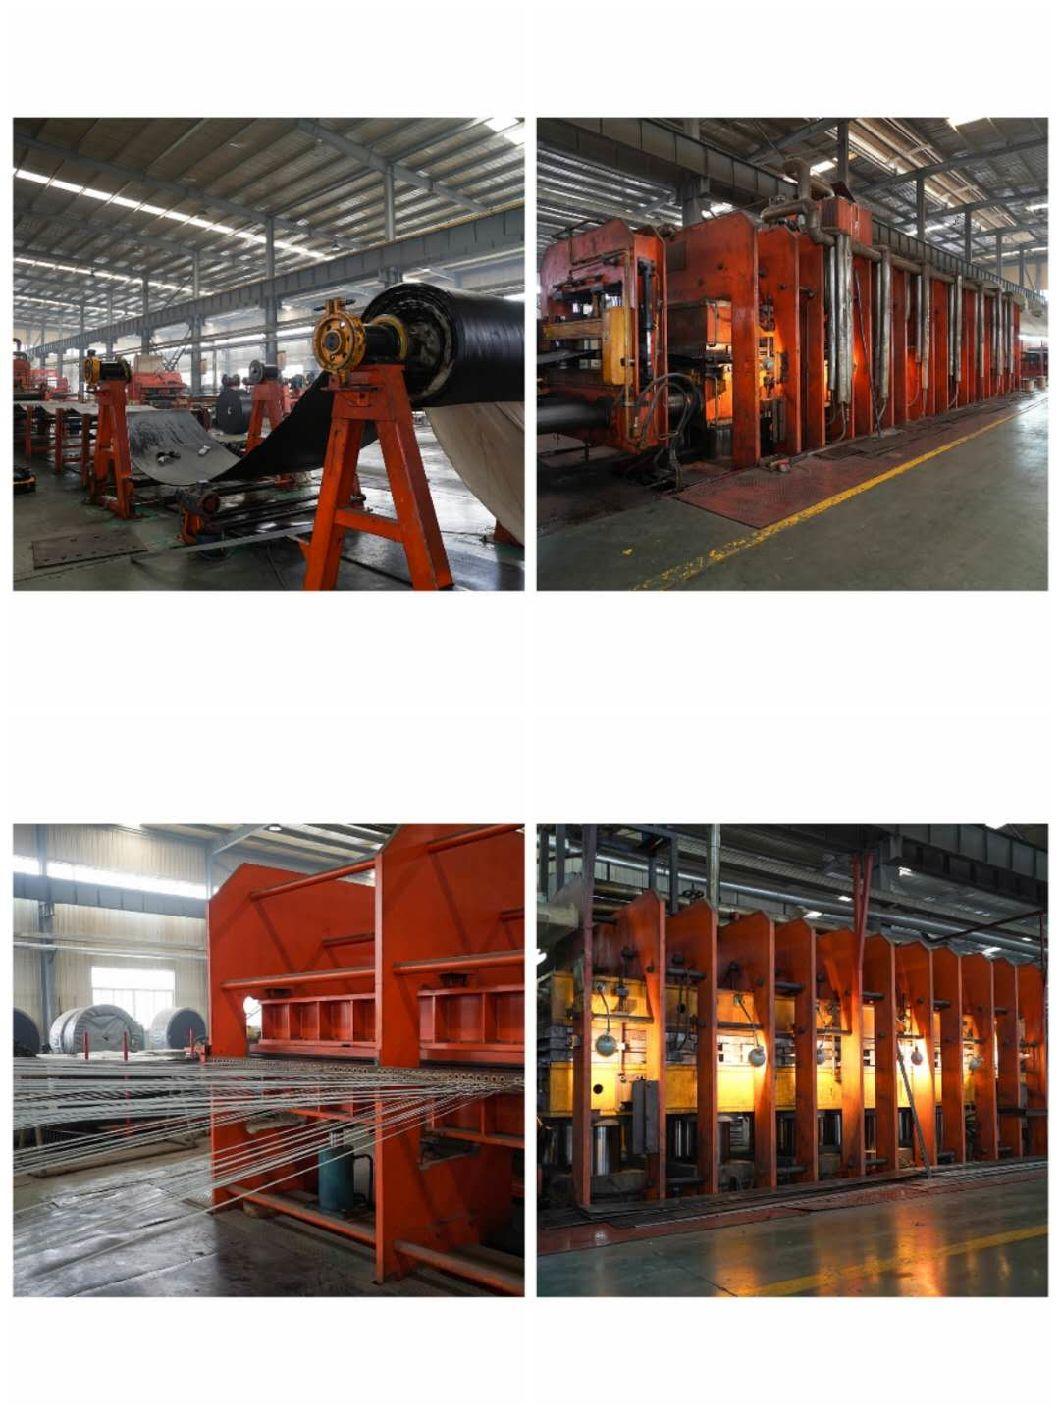 Rubber Conveyor Belt with STB Carcass for Stone Crusher